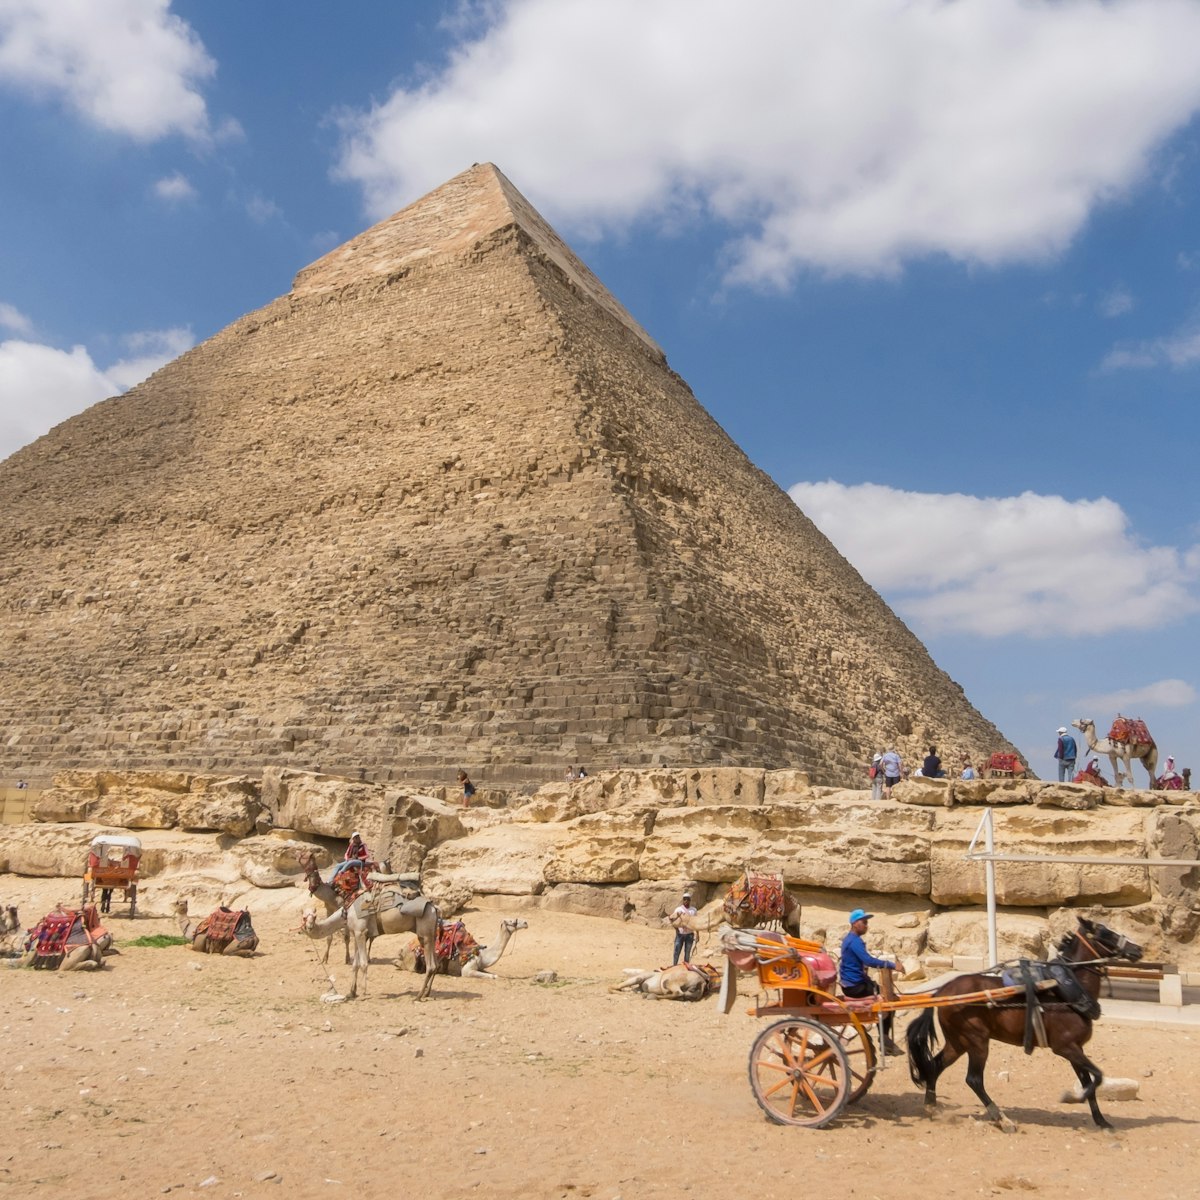 Camels and horse-drawn carriages next to Khafre's pyramid in Giza.